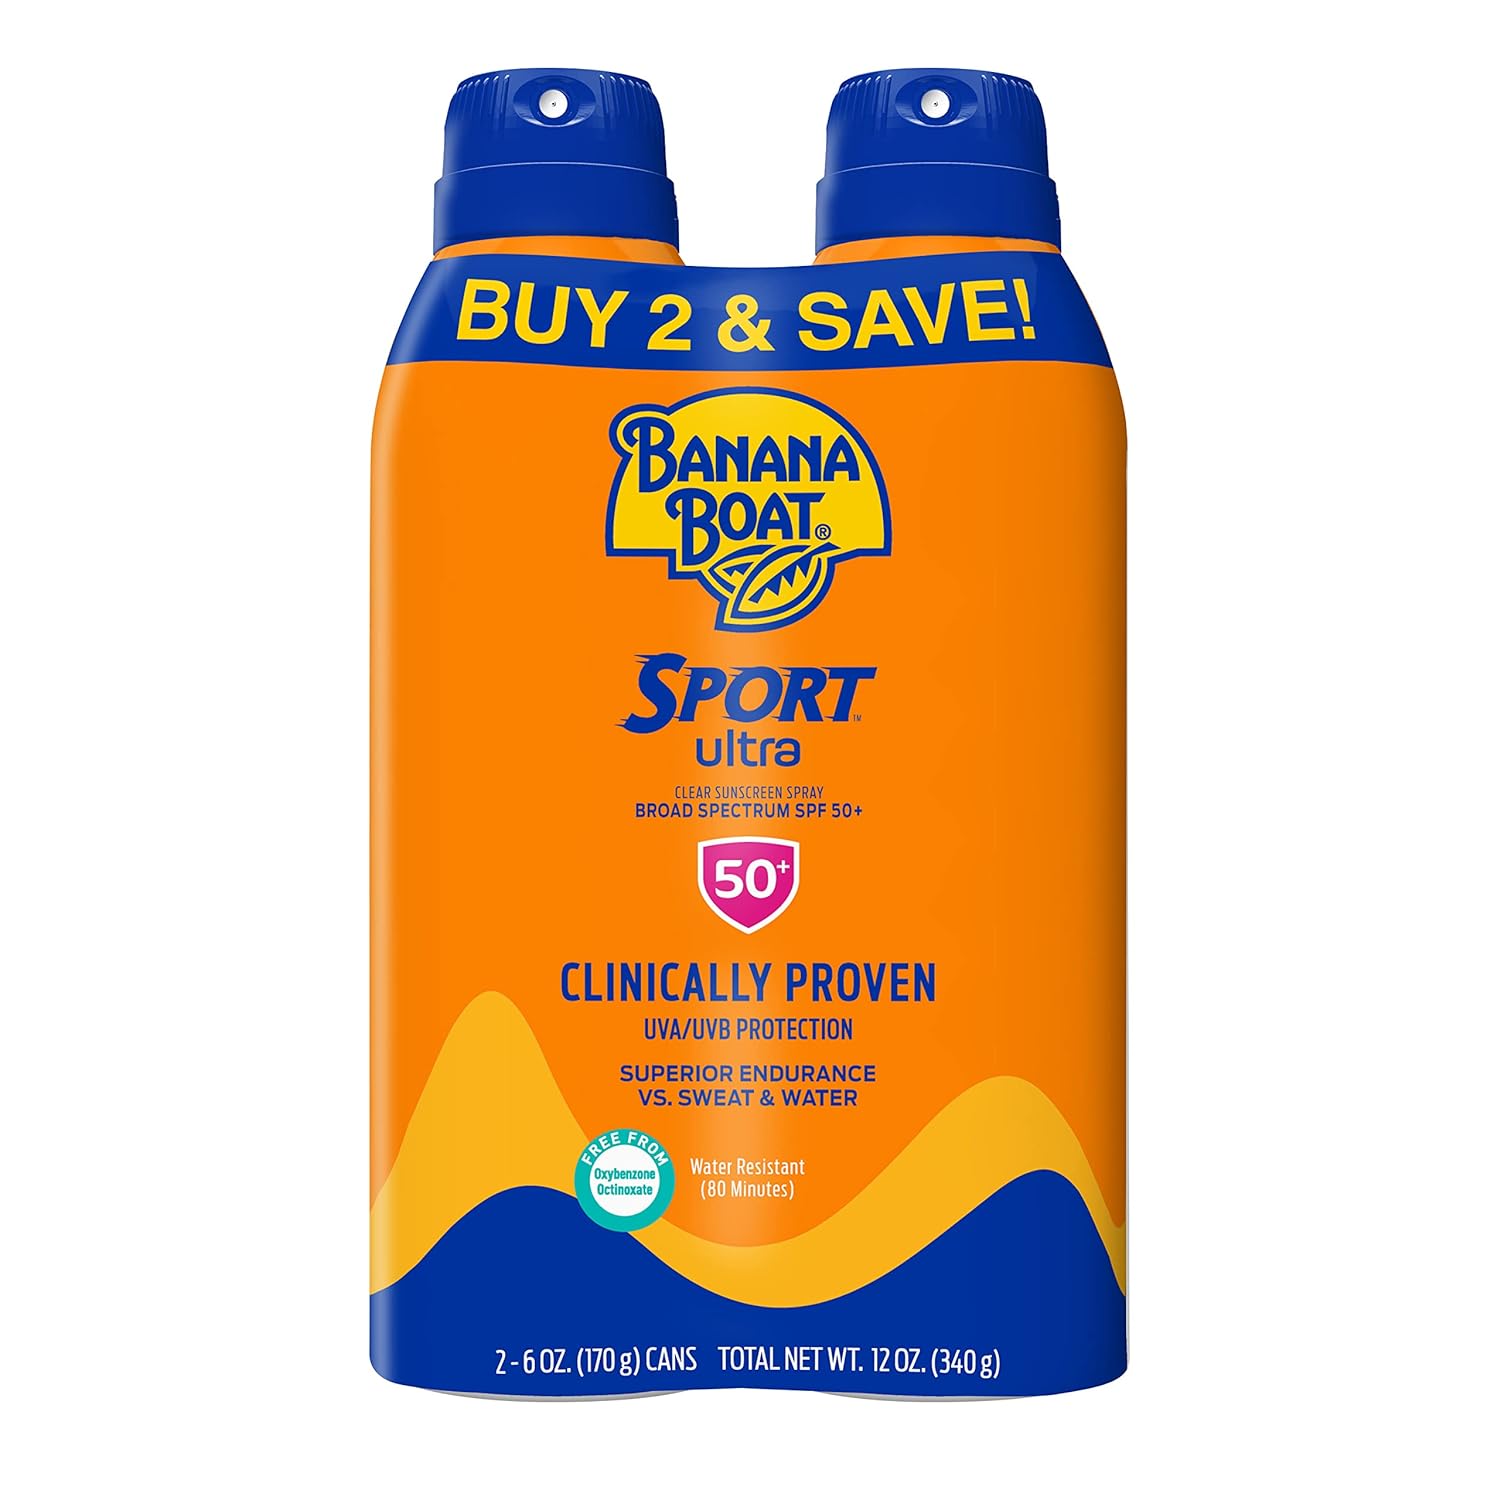 Banana Boat Sport Ultra SPF 50 Sunscreen Spray Twin Pack | Banana Boat Sunscreen Spray SPF 50, Spray On Sunscreen, Water Resistant Sunscreen, Oxybenzone Free Sunscreen Pack, 6oz each